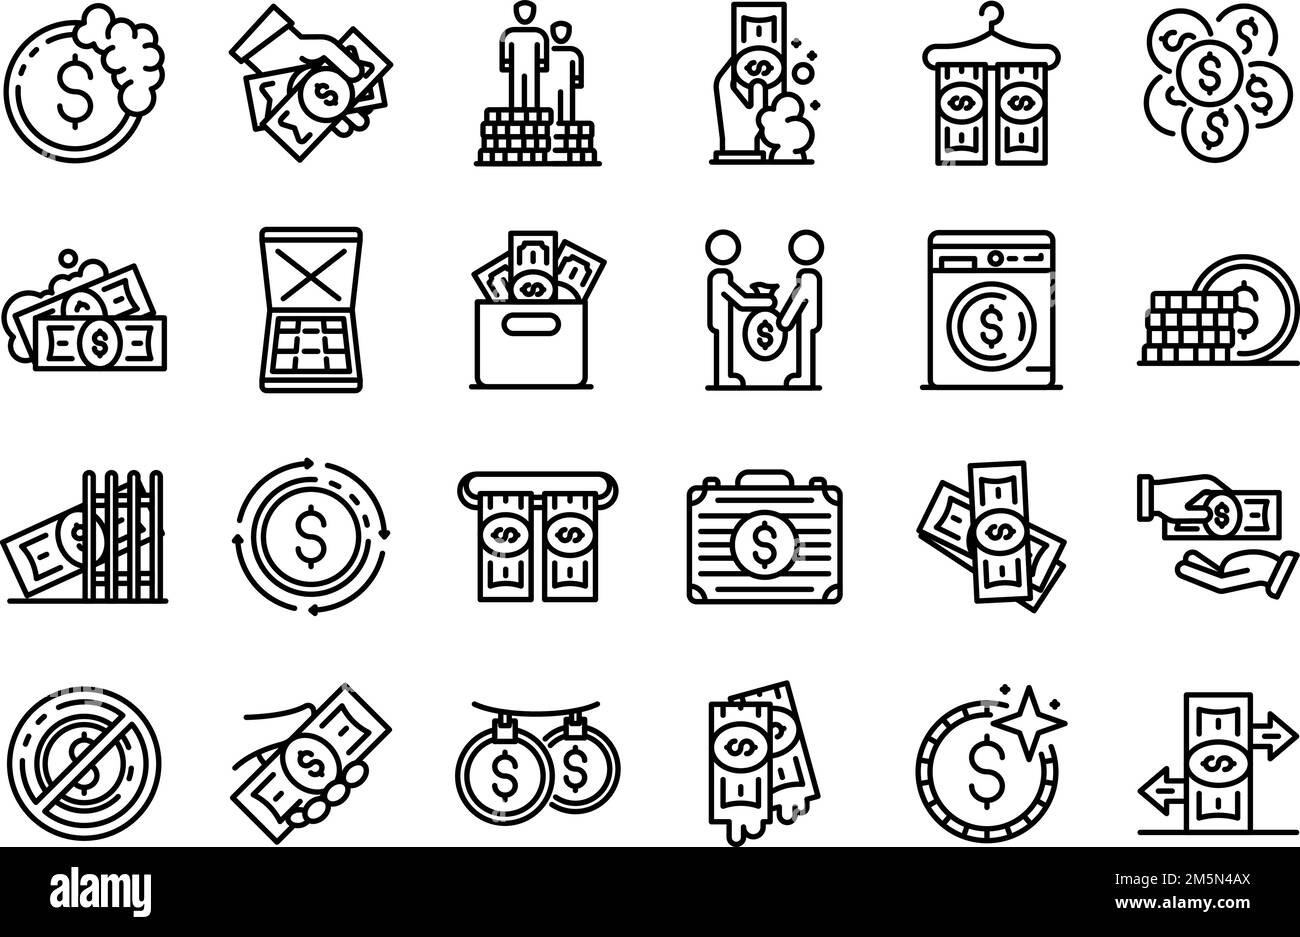 Money laundering icons set. Outline set of money laundering vector icons for web design isolated on white background Stock Vector